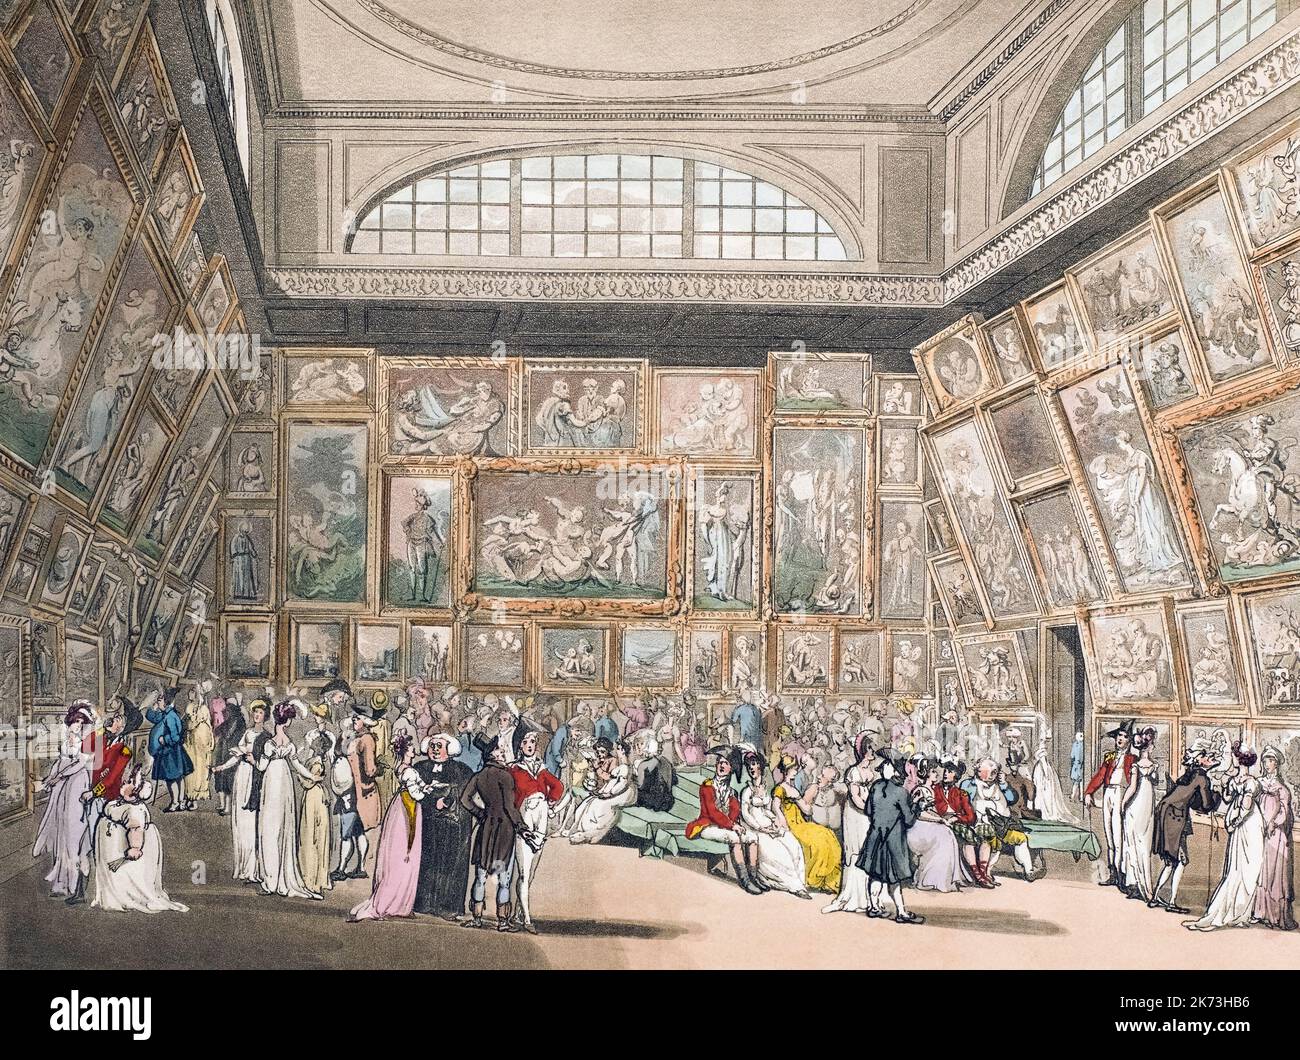 Exhibition room, Somerset House.  Circa 1808.  The Great Room of the Royal Academy.  (This room is now part of the Courtauld Gallery). After a work by August Pugin and Thomas Rowlandson in the Microcosm of London, published in three volumes between 1808 and 1810 by Rudolph Ackermann.   Pugin was the artist responsible for the architectural elements in the Microcosm pictures; Thomas Rowlandson was hired to add the lively human figures. Stock Photo